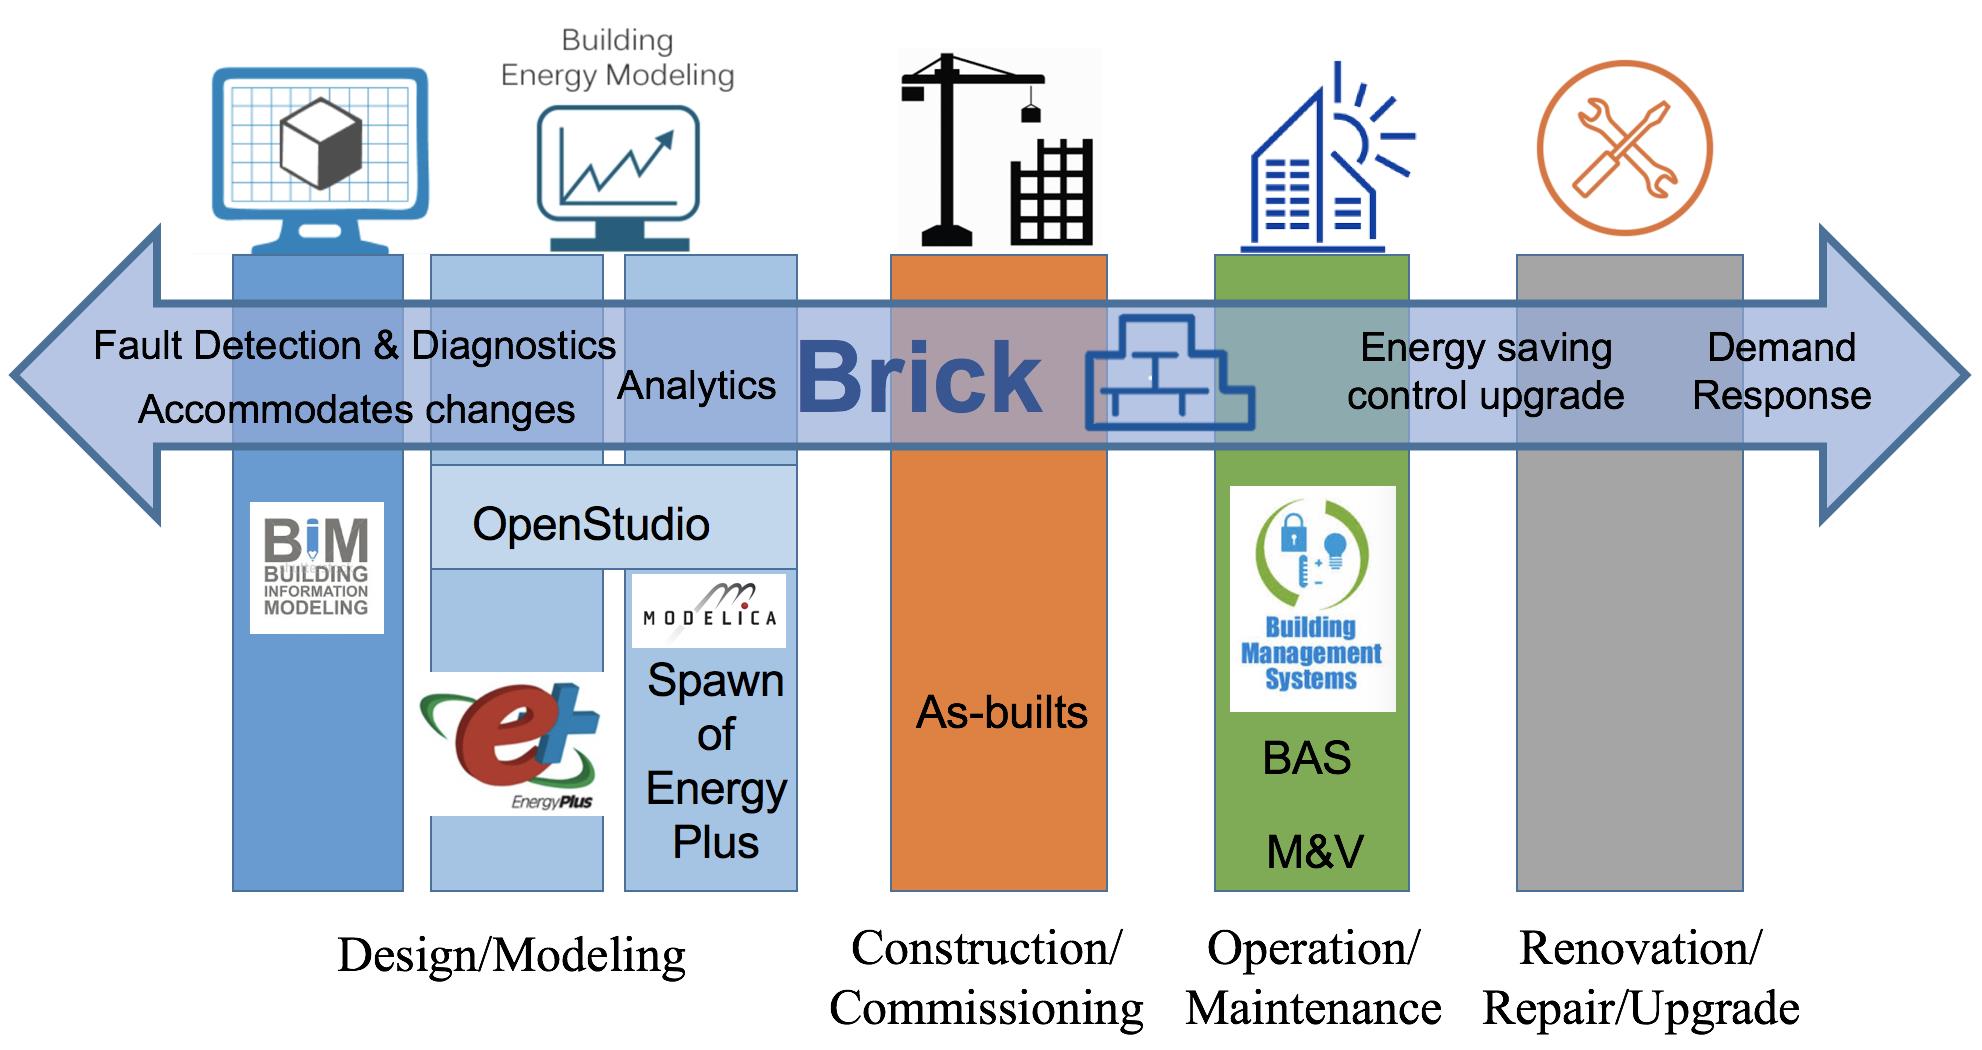 diagram showing how Brick works across diagnostics, analytics, and demand response